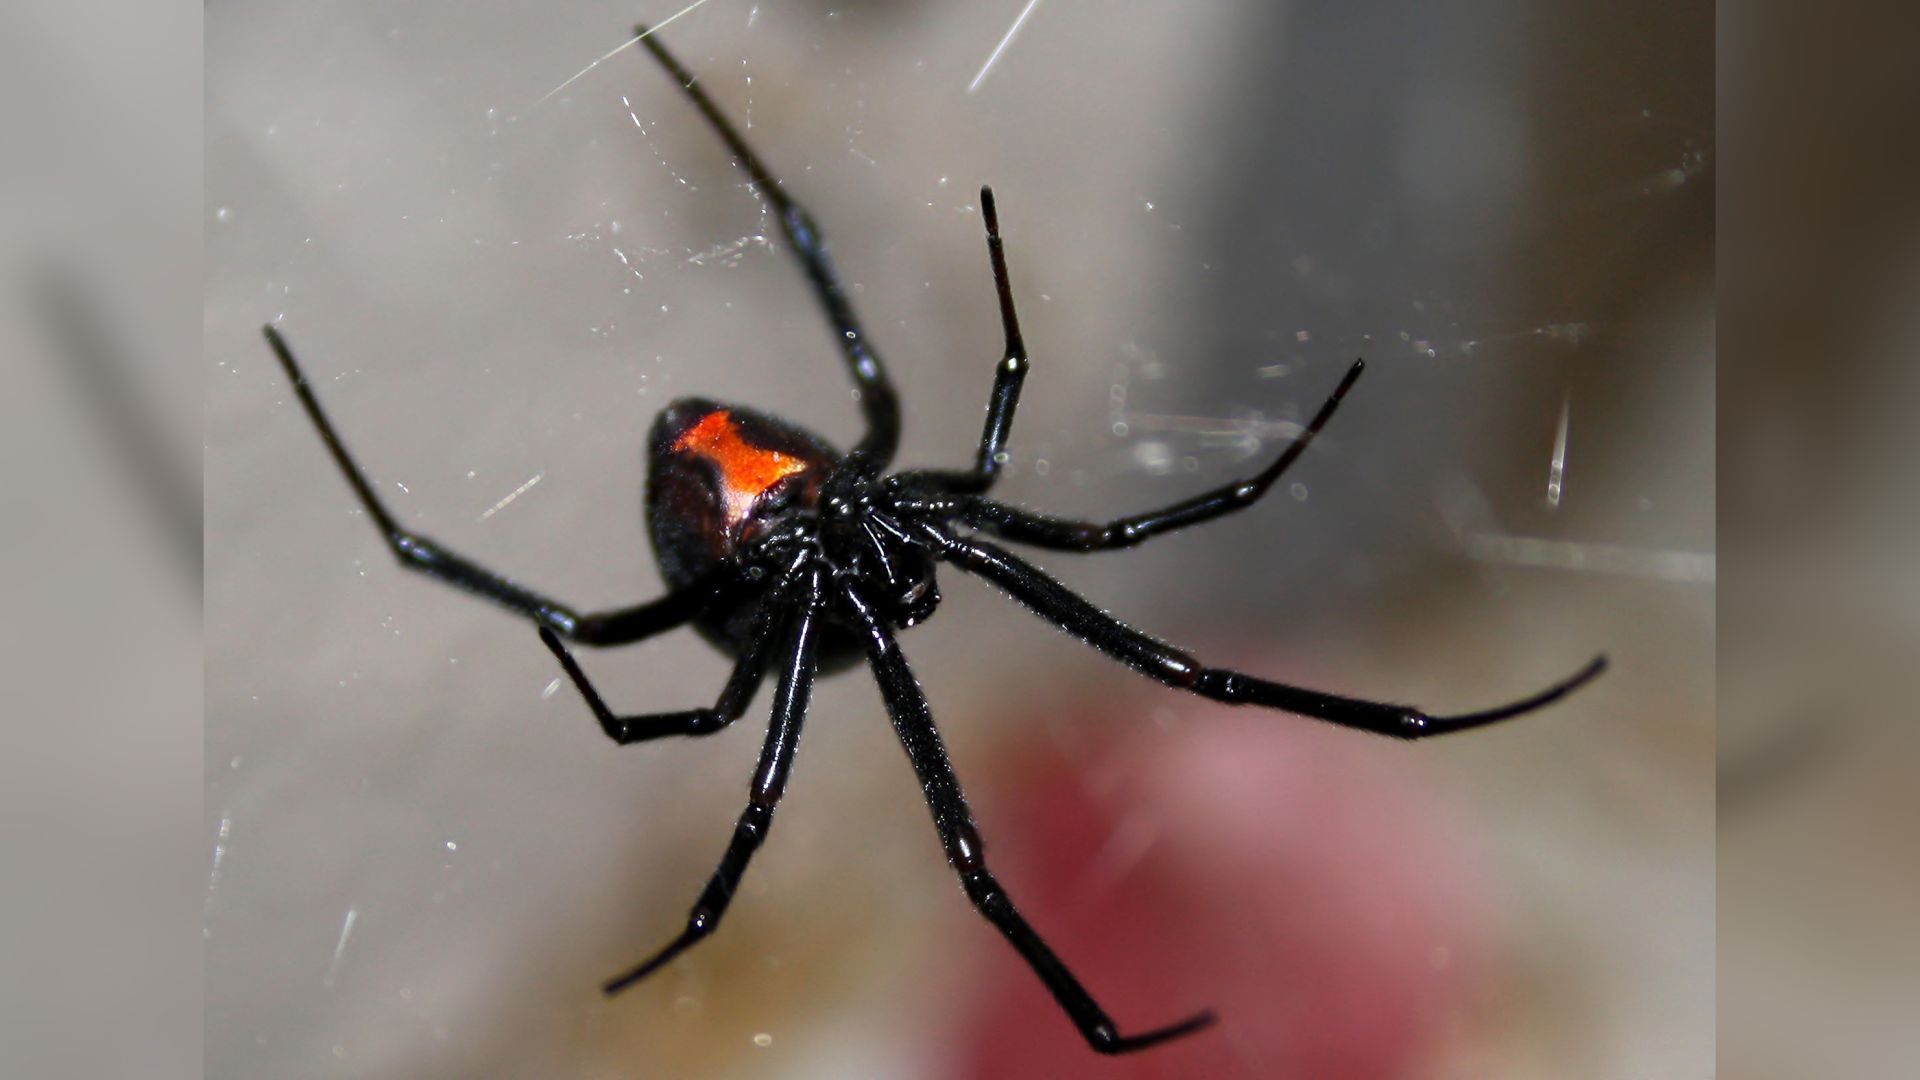 <p>                     In the genus <em>Latrodectus</em>, the black widow is one of the most venomous spiders and is found on every continent except Antarctica. In North America, they're commonly found in southern Canada and in the northeastern United States. You can identify the female black widow spider by its shiny black body and distinct red hourglass-shape on the underside of the abdomen. The male black widow is smaller in size, brown or gray in color with small red sports and does not have the hourglass marking.                   </p>                                      <p>                     While both male and female black widows are venomous, only the female is dangerous to humans. The venom of a black widow is reported to be 15 times stronger than that of a rattlesnake, although they don’t deliver as much venom in their bite, so fatalities are rare. That’s not to say a black widow bite isn’t painful! Those unlucky enough to be bitten by a black widow will experience nausea, fever, sweating, restlessness, muscle cramps and labored breathing, and these symptoms may last for several days.                   </p>